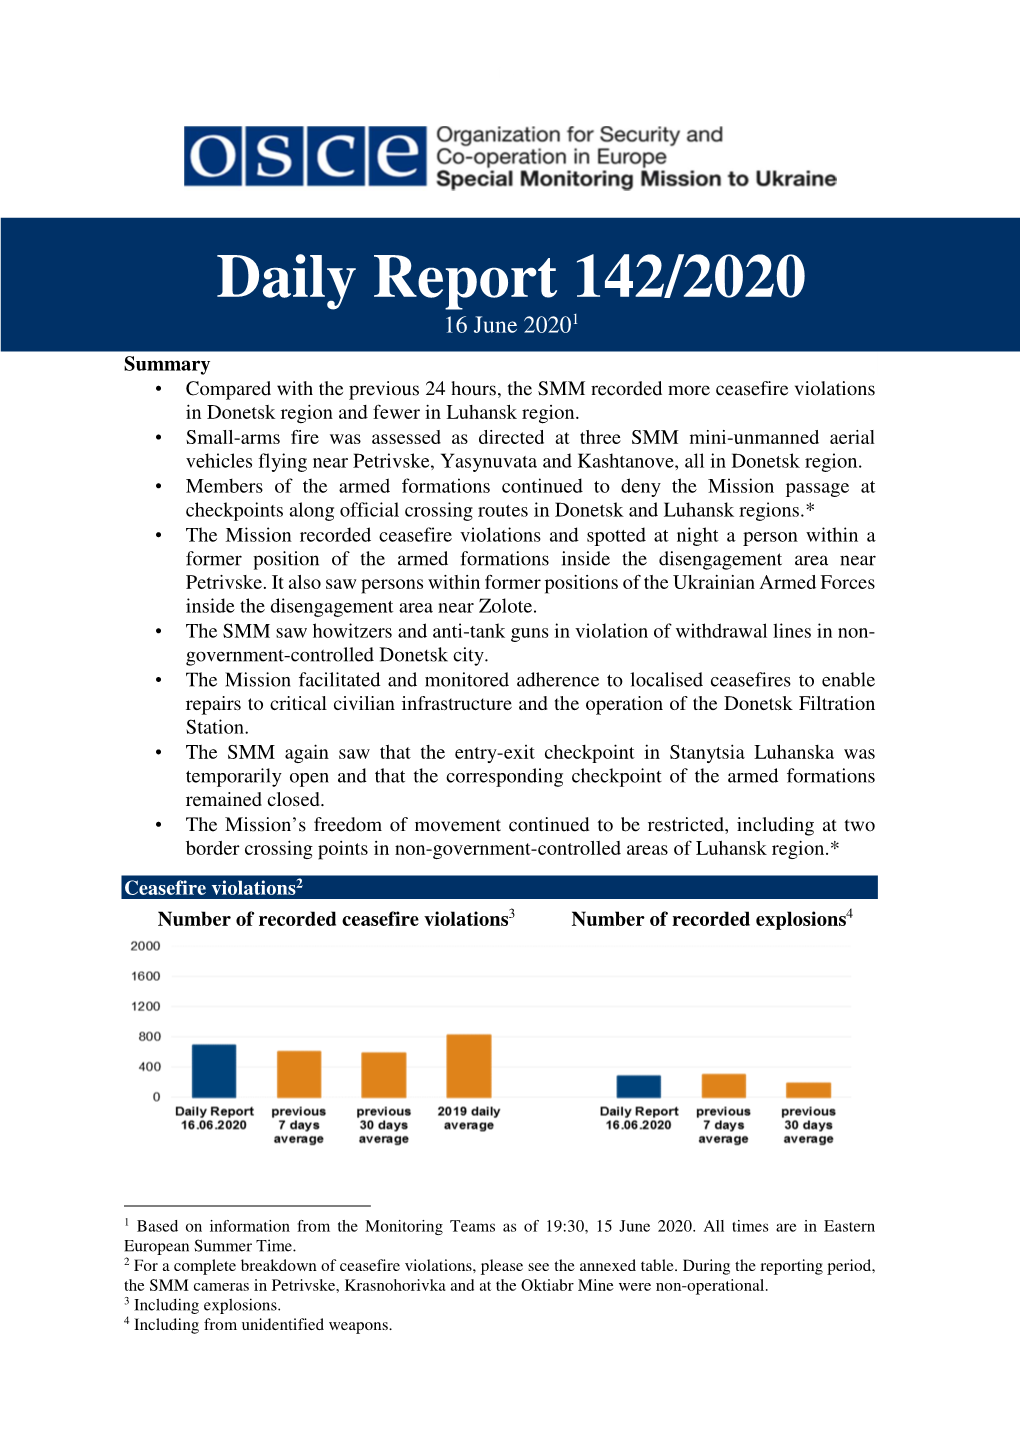 2020-06-16 Daily Report